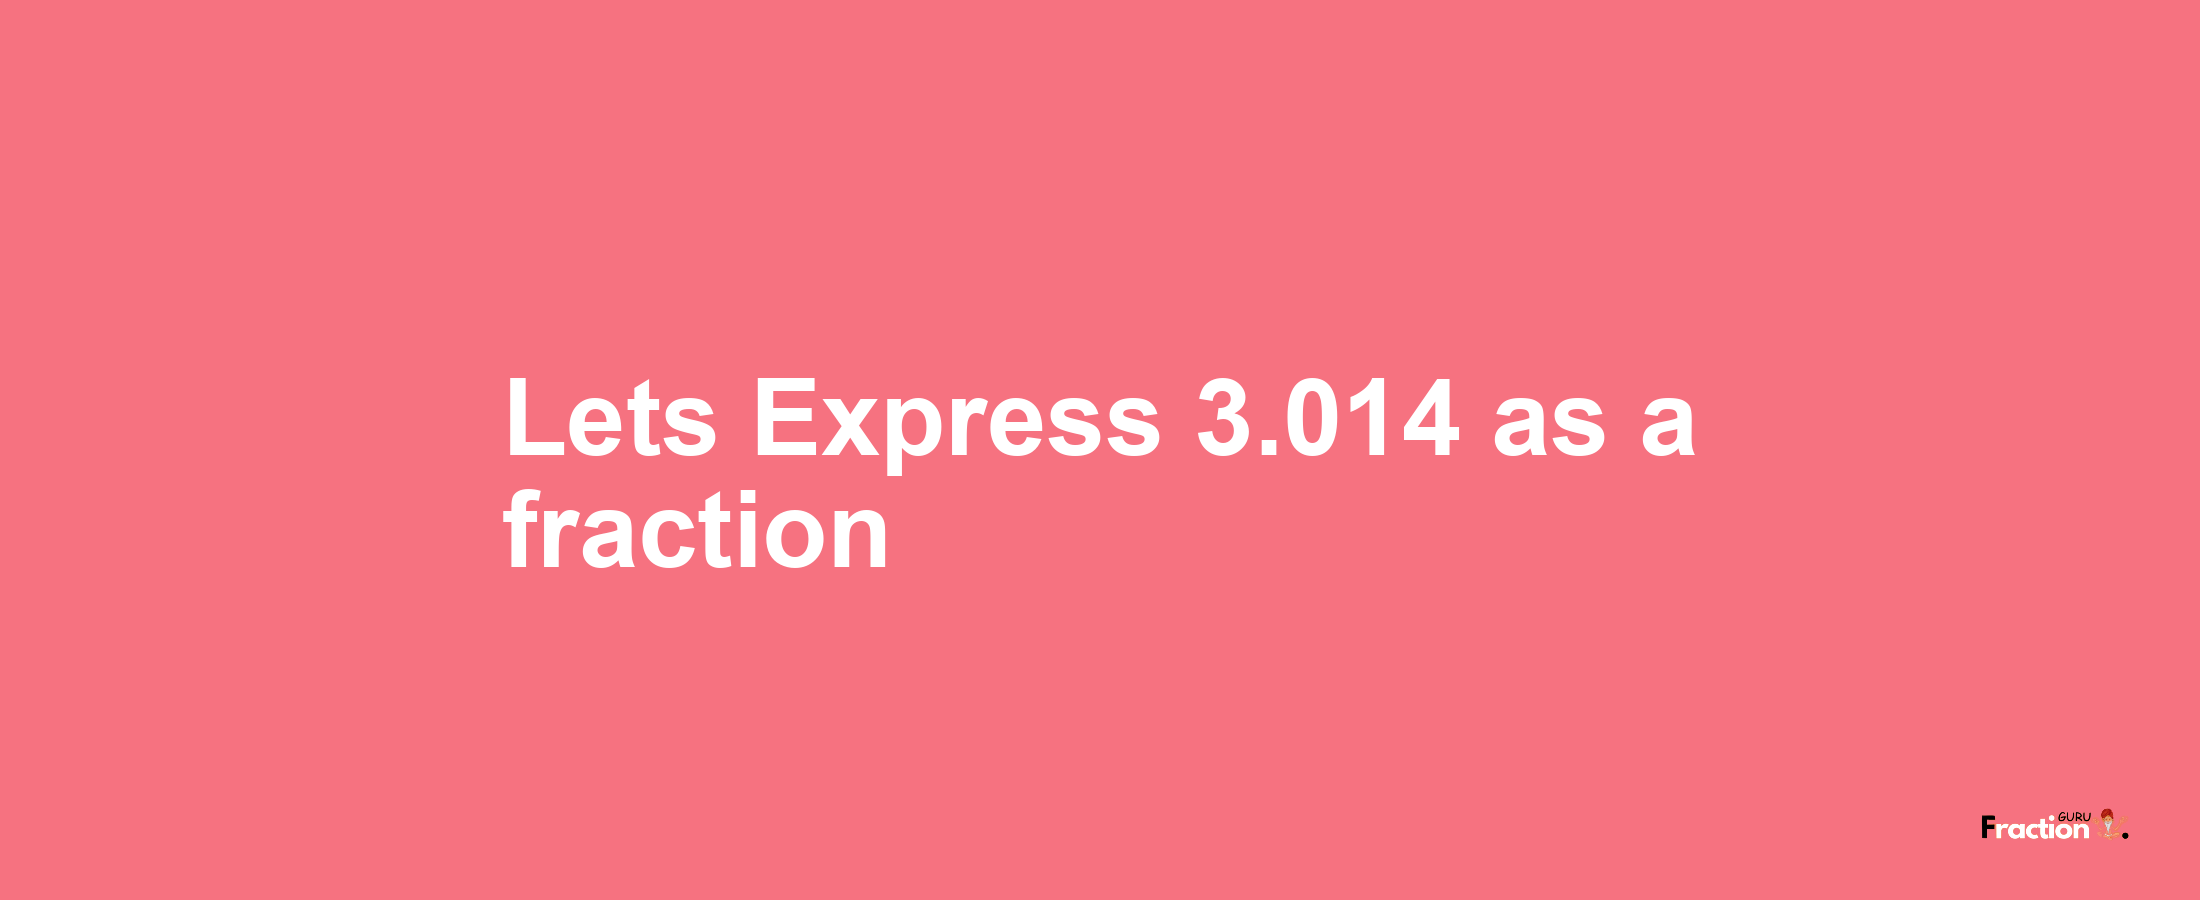 Lets Express 3.014 as afraction